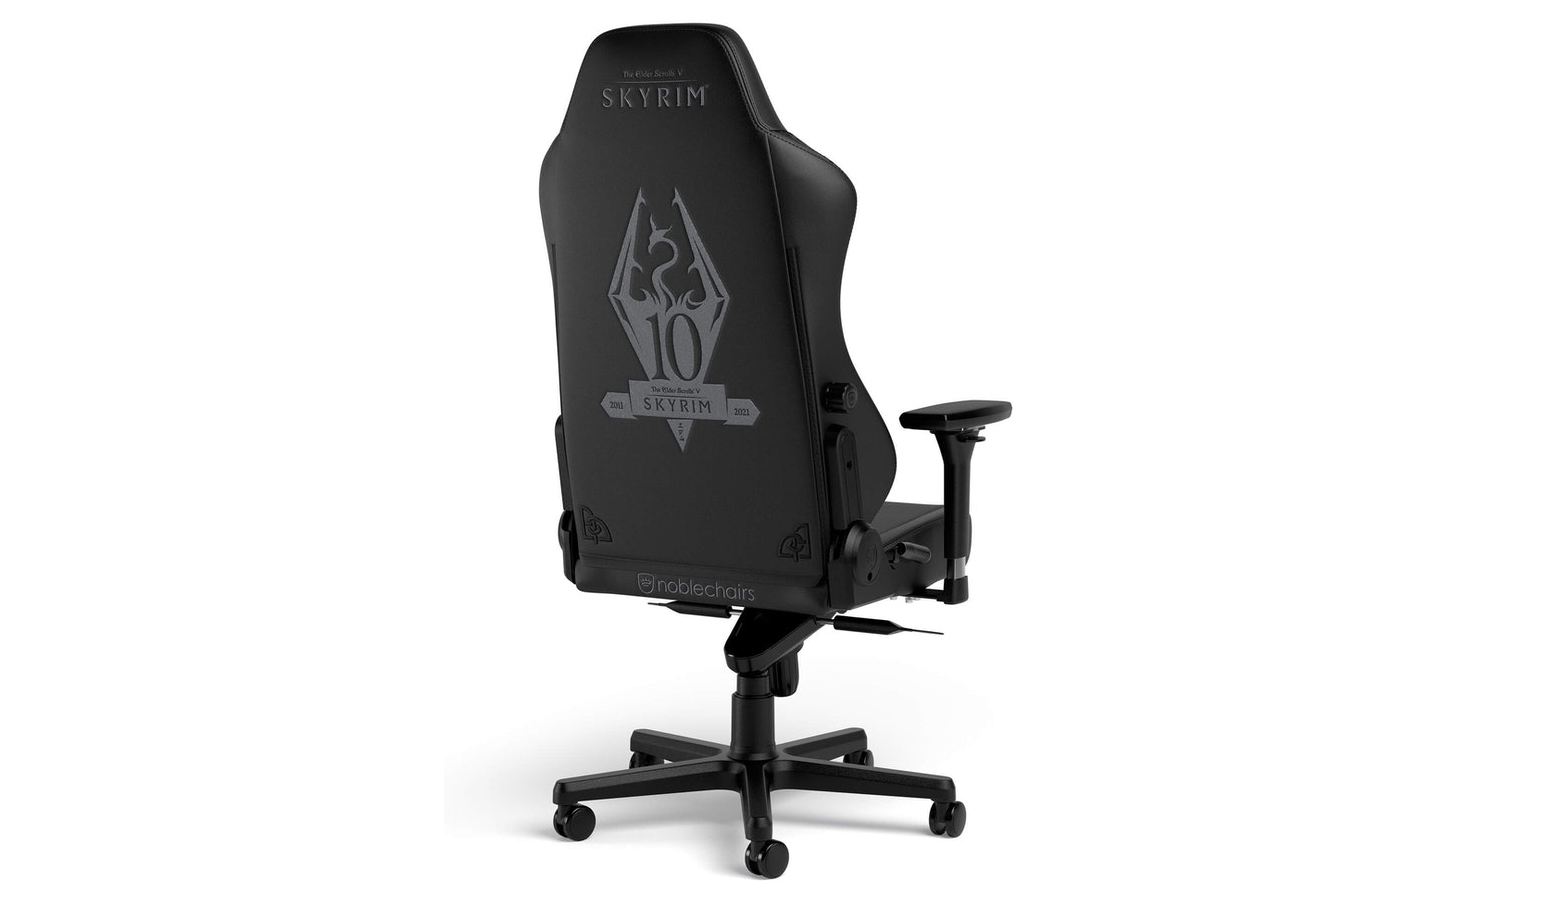  Please stop sticking ugly logos on gaming chairs 